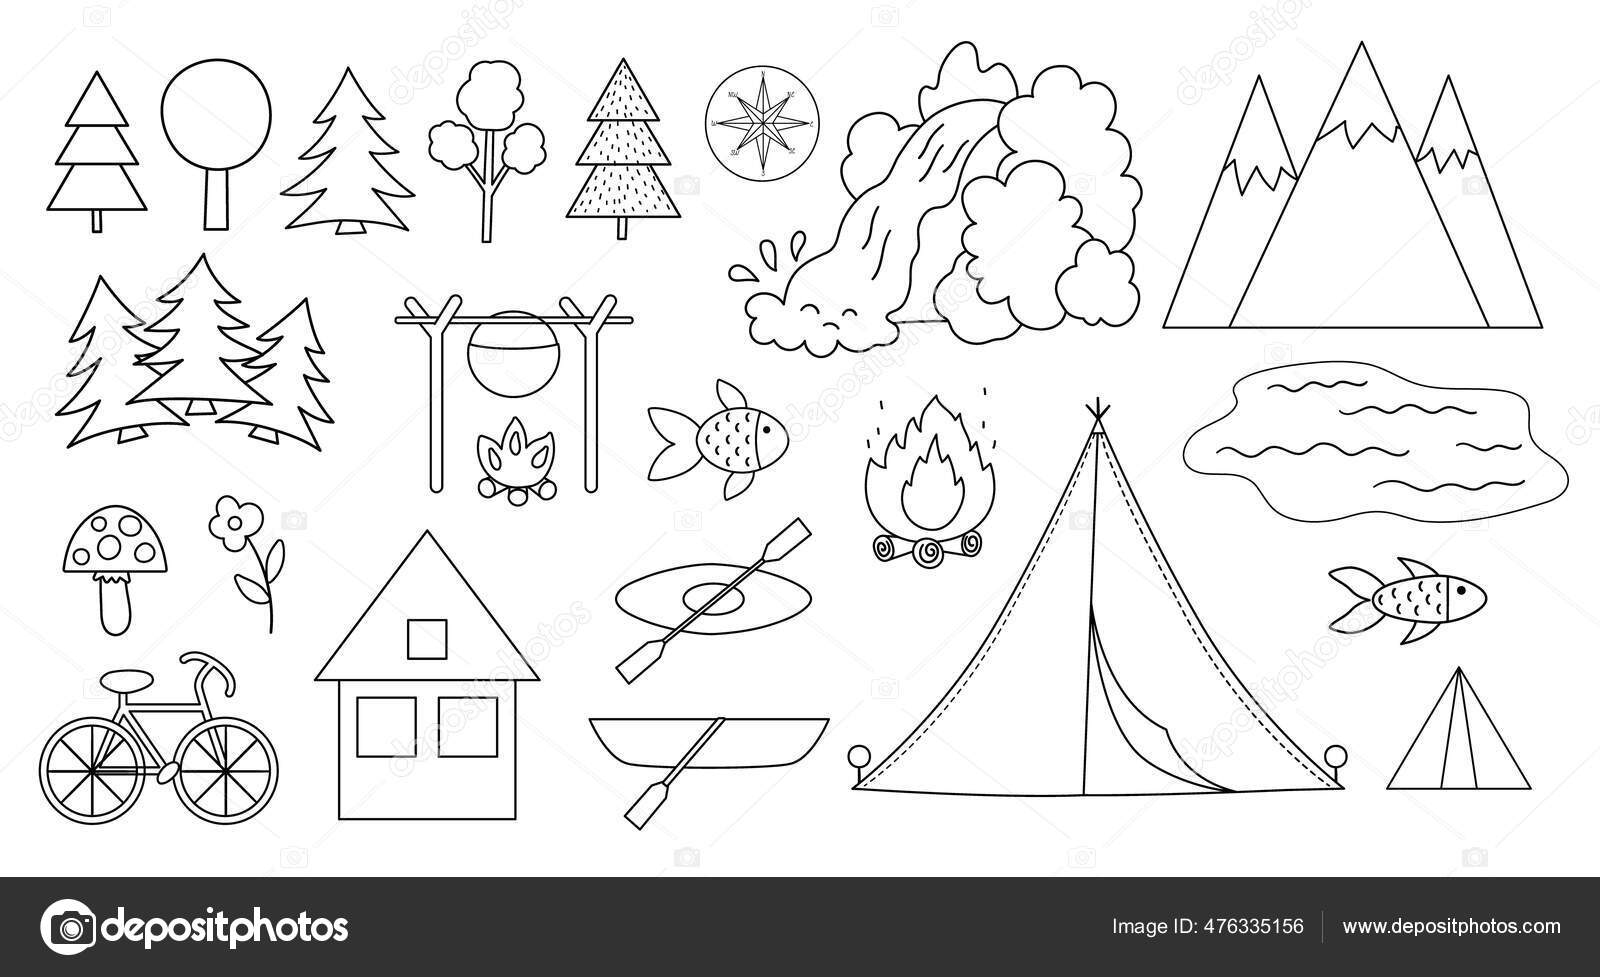 Vector summer camp cute kawaii stickers set. Camping, hiking, fishing  equipment patches collection. Outdoor nature tourism icons pack with  backpack, van, tent. Forest travel patches . Stock Vector